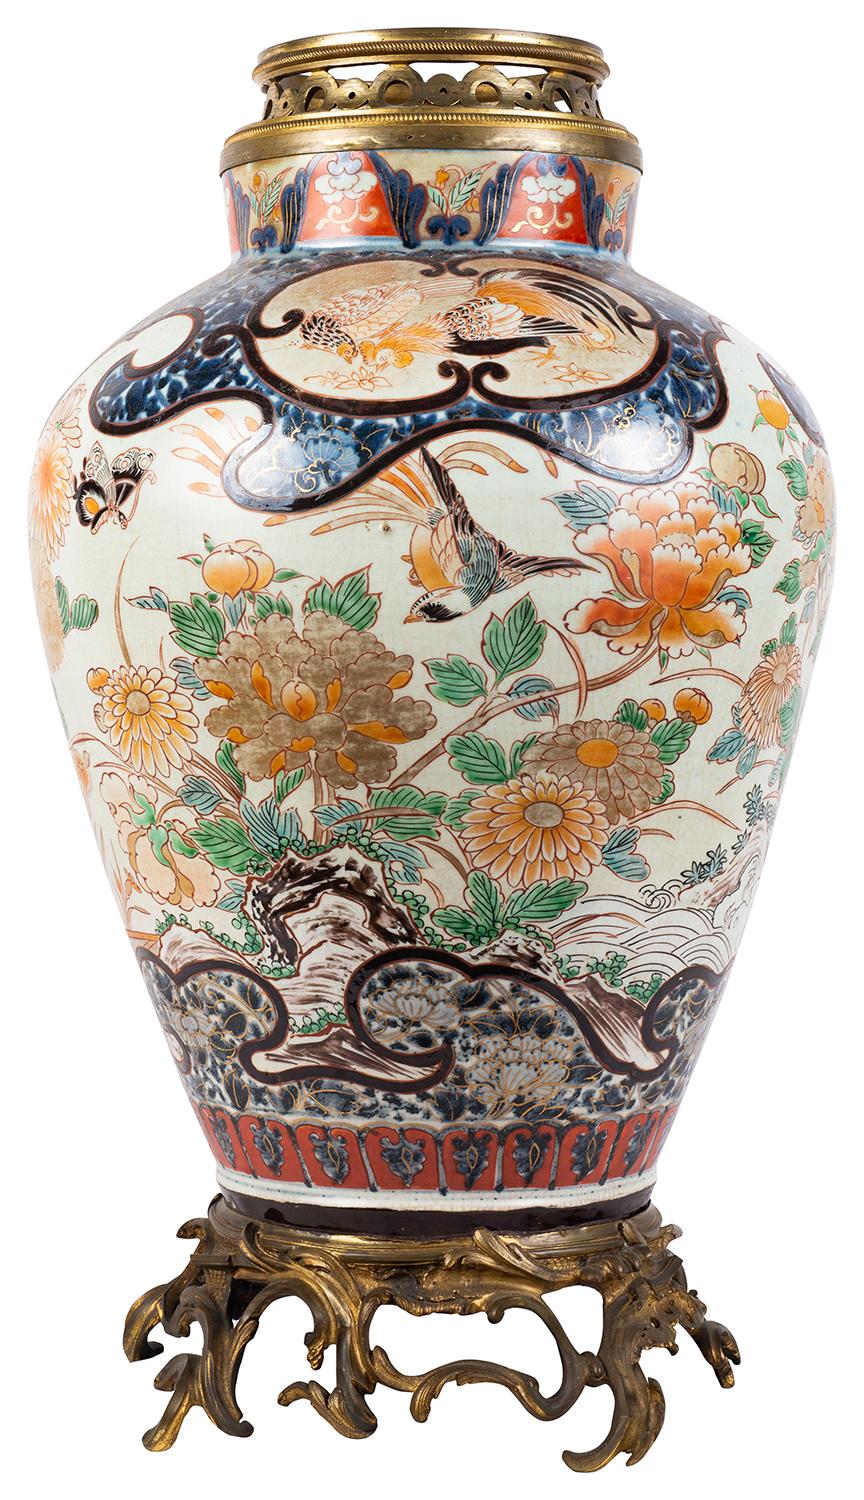 A very impressive and decorative 18th century Japanese Imari vase / lamp. Having wonderful scrolling gilded Rococo style ormolu mounts to the top and base. Classical hand painted motif decoration tooth boarders with inset panels depicting exotic